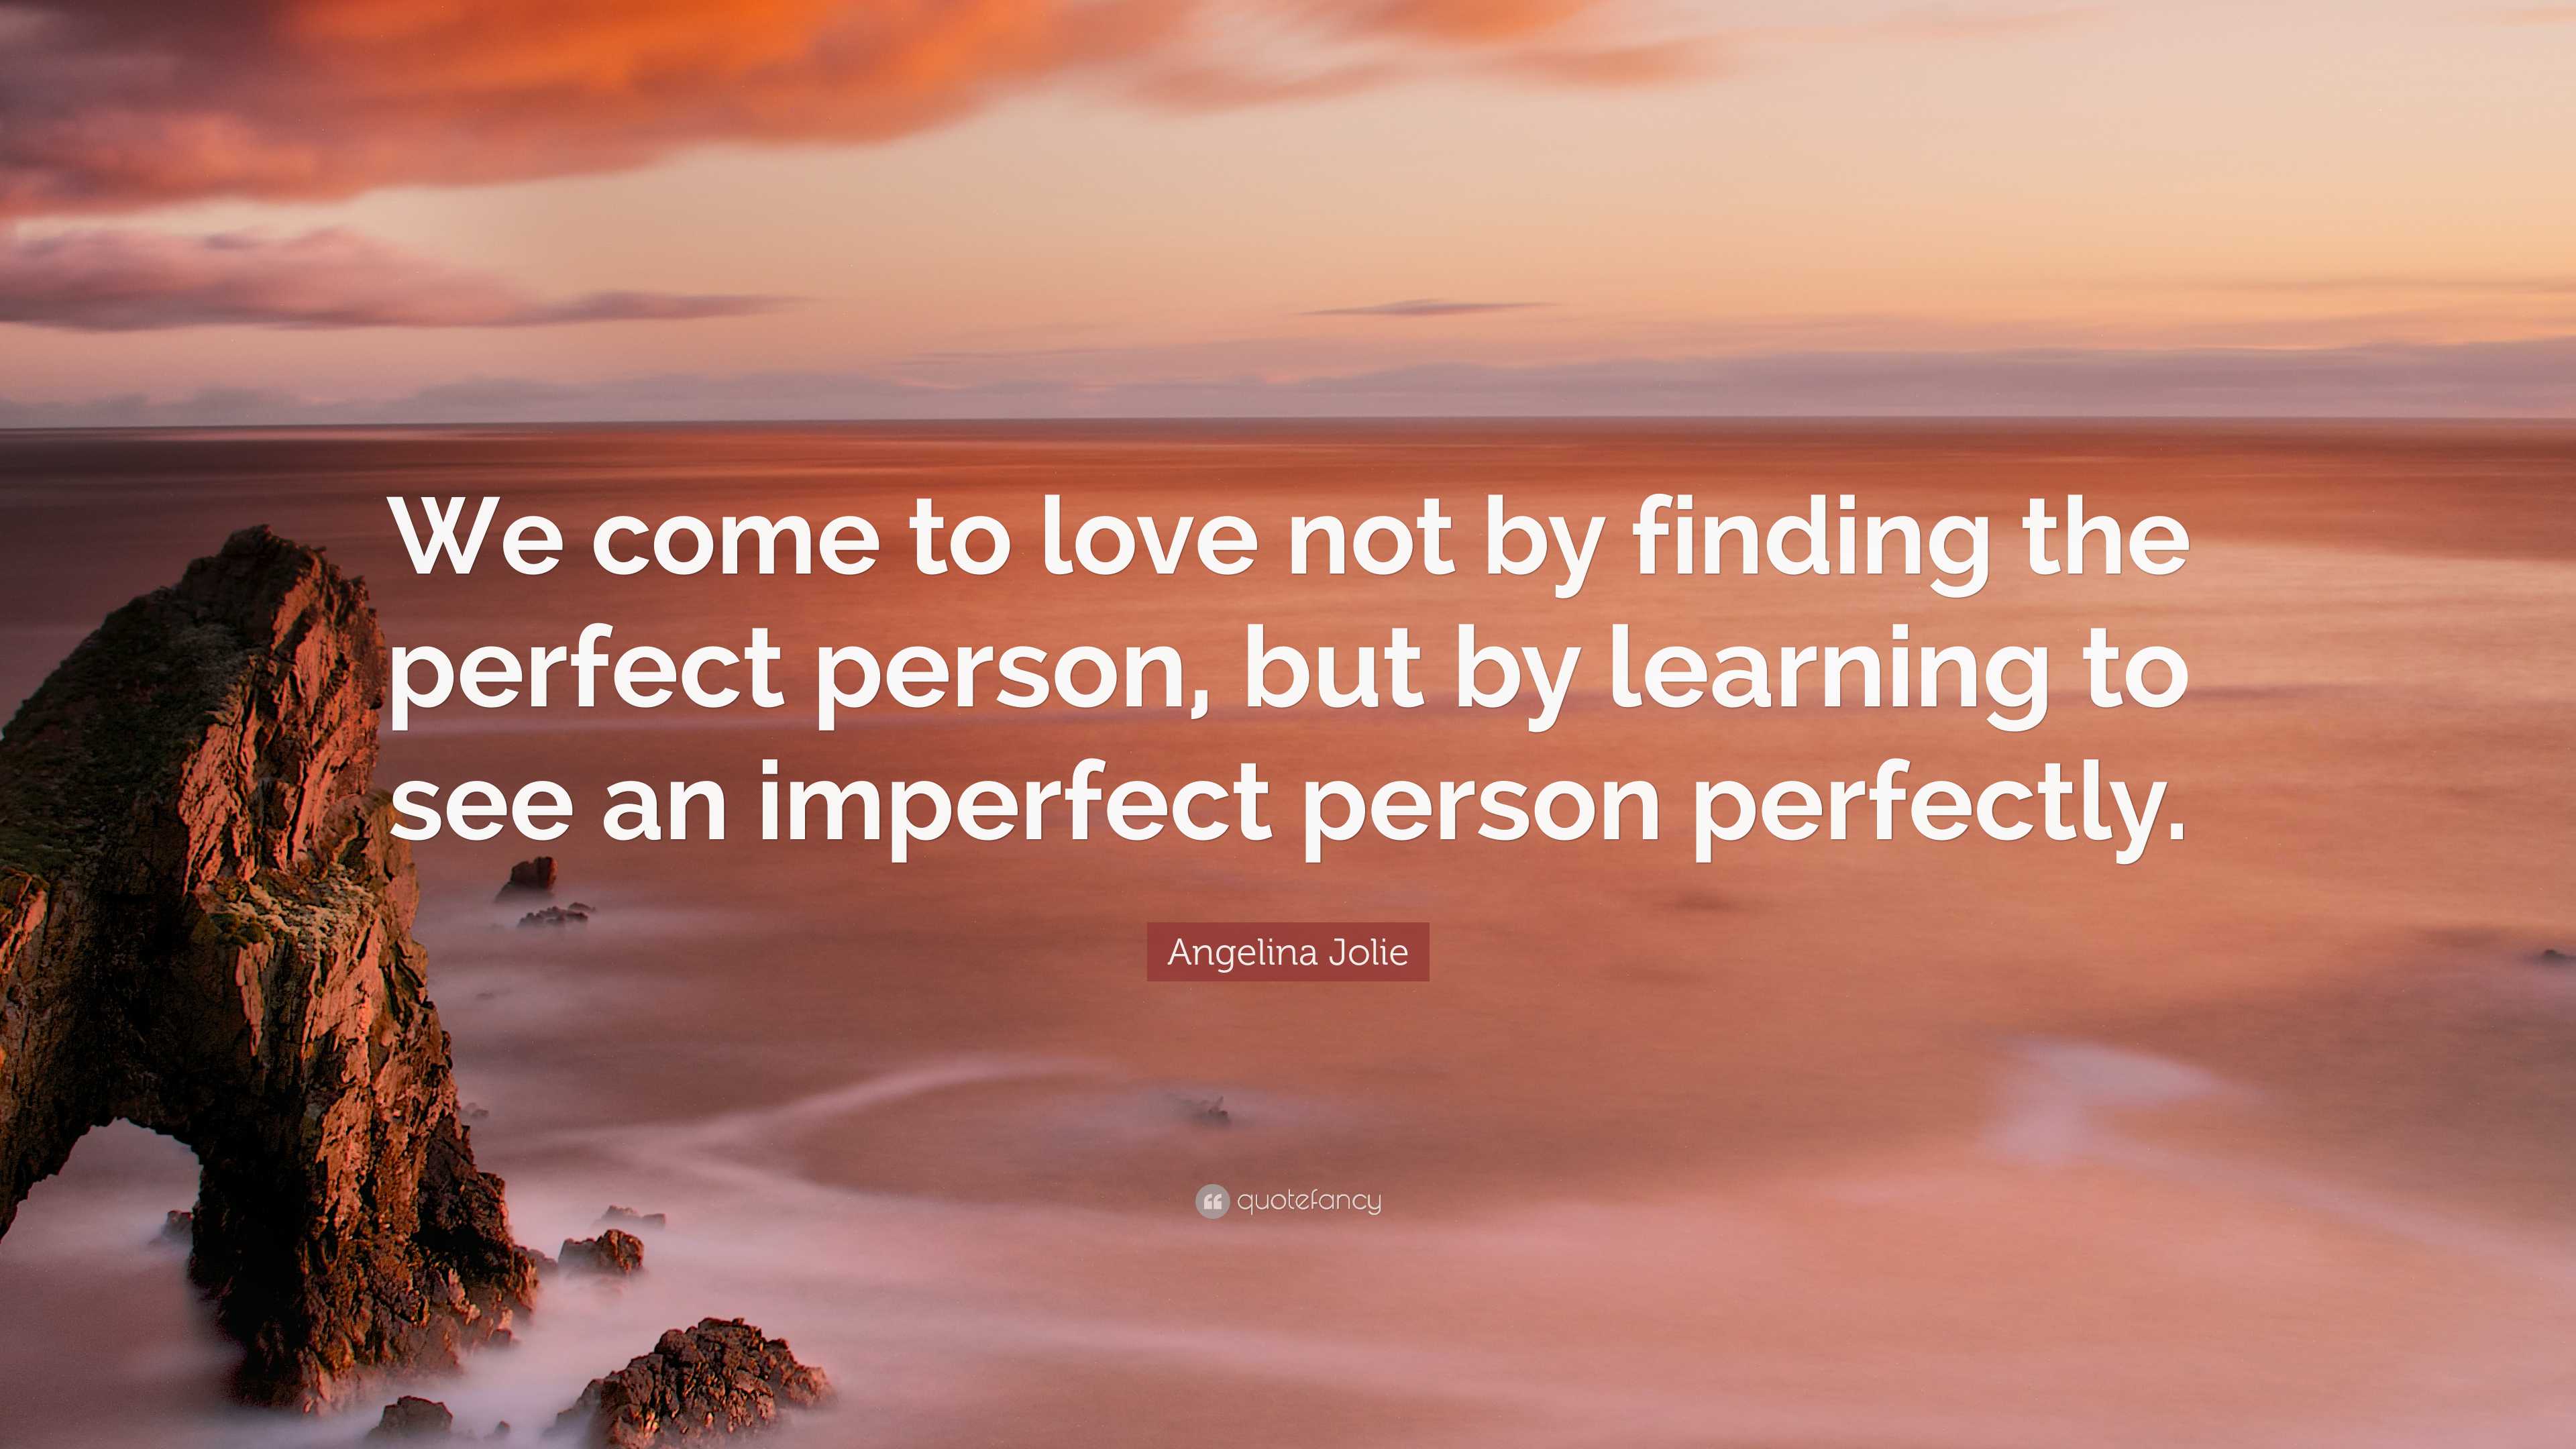 Angelina Jolie Quote: “We come to love not by finding the perfect person,  but by learning